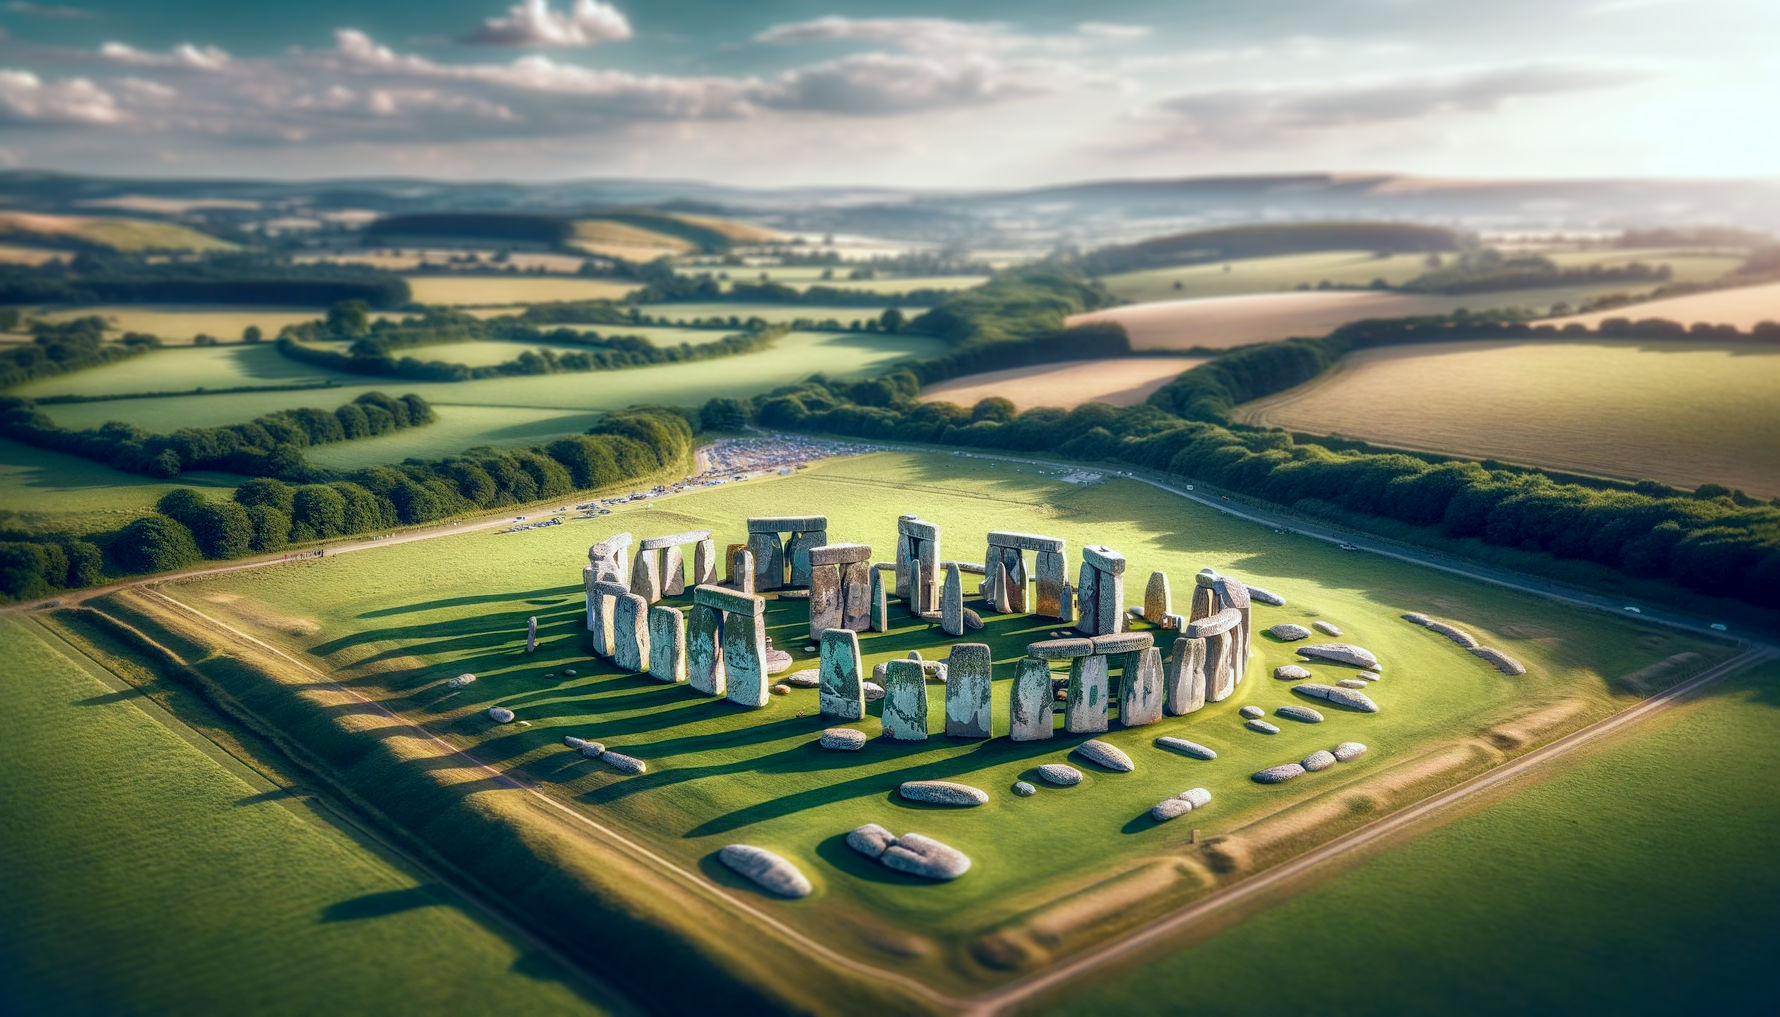 Aerial View of Stonehenge: Showcasing the entire layout of the monument in its picturesque countryside setting.